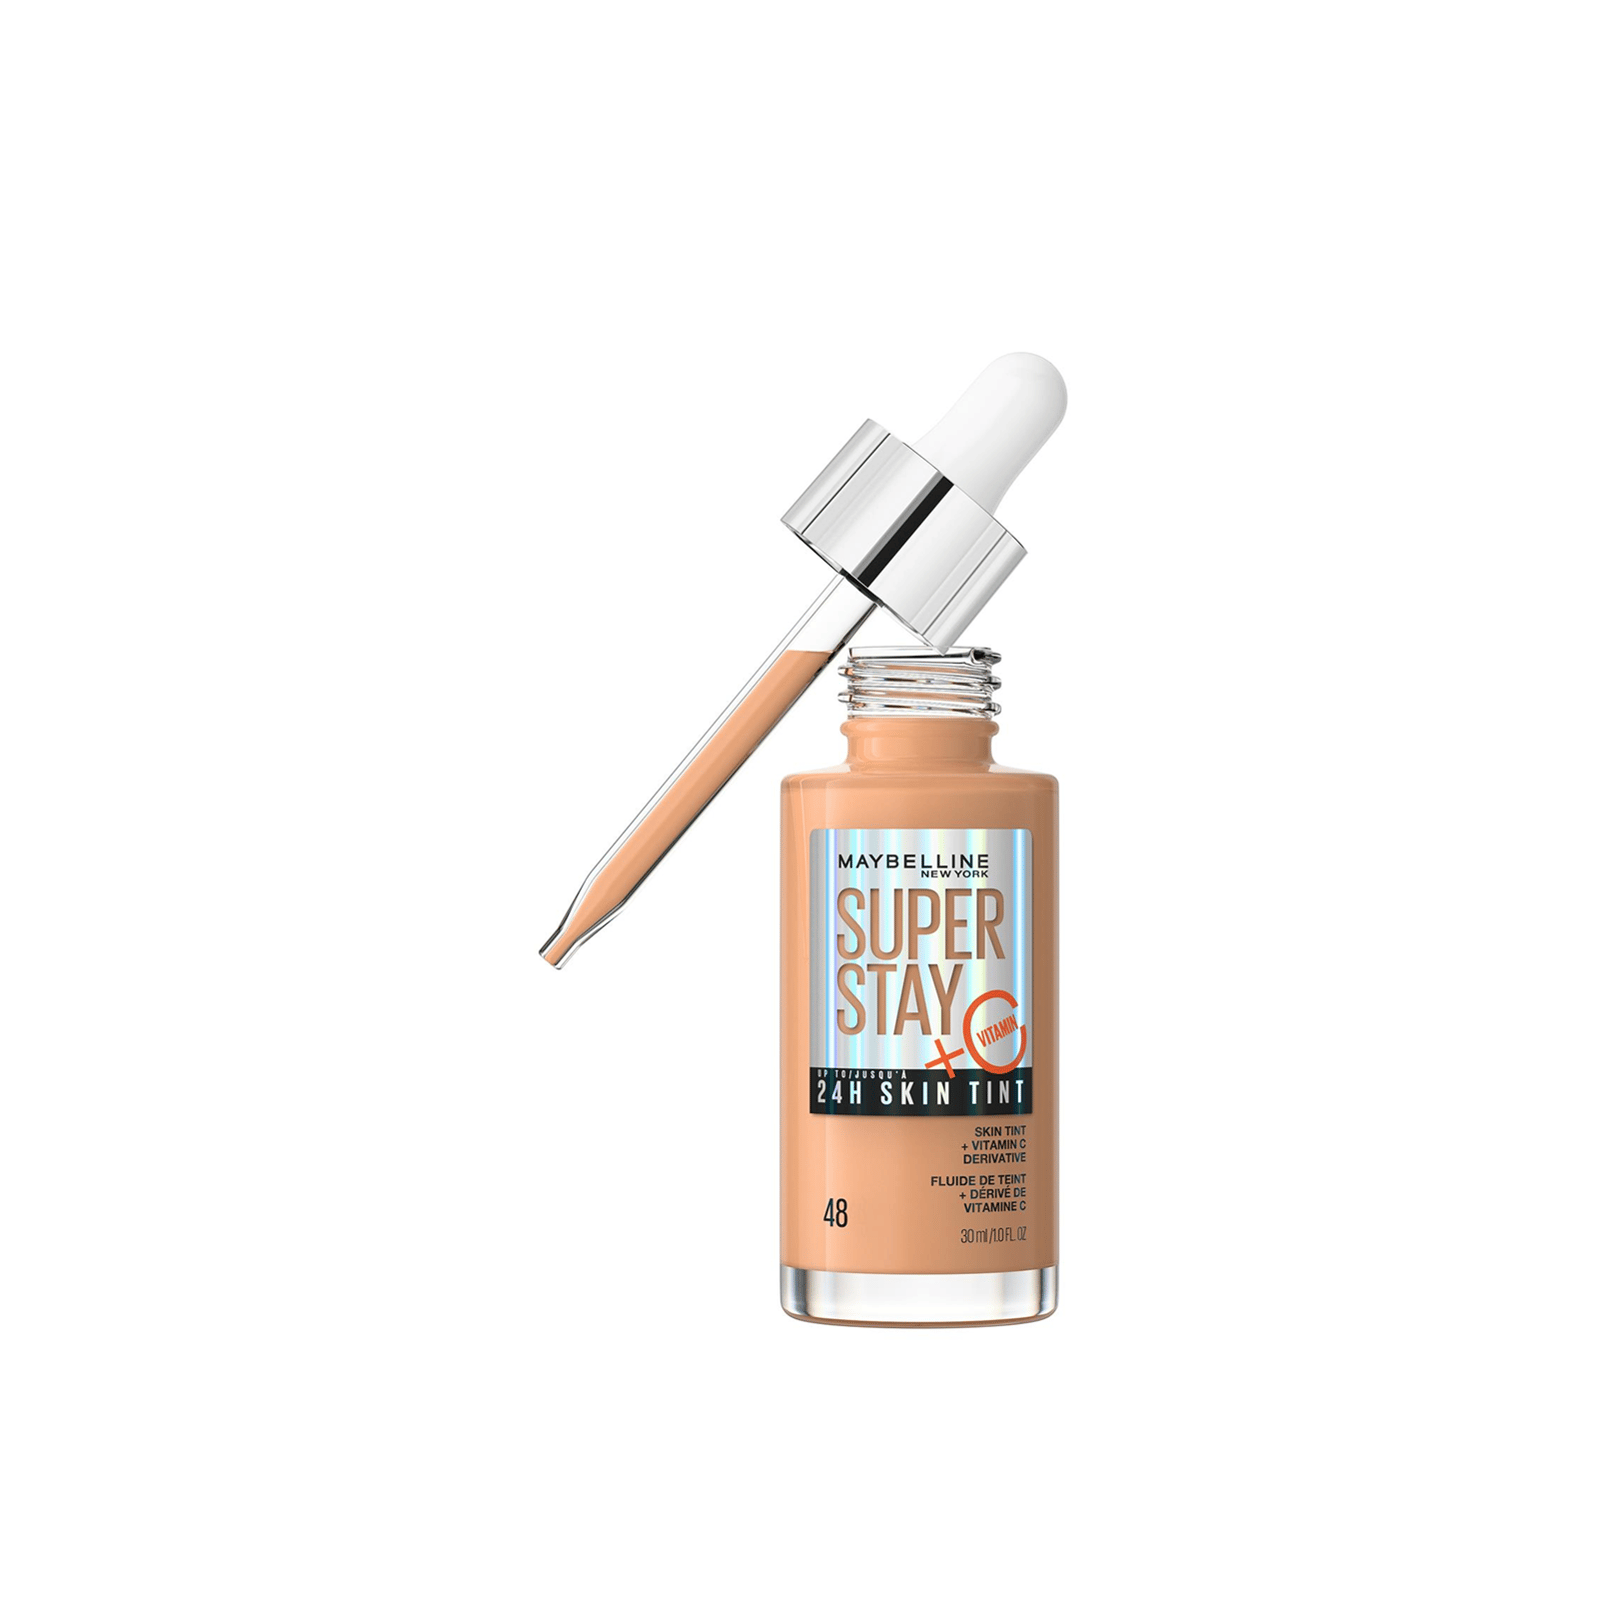 Maybelline Super Stay 24H Skin Tint Foundation 48 30ml